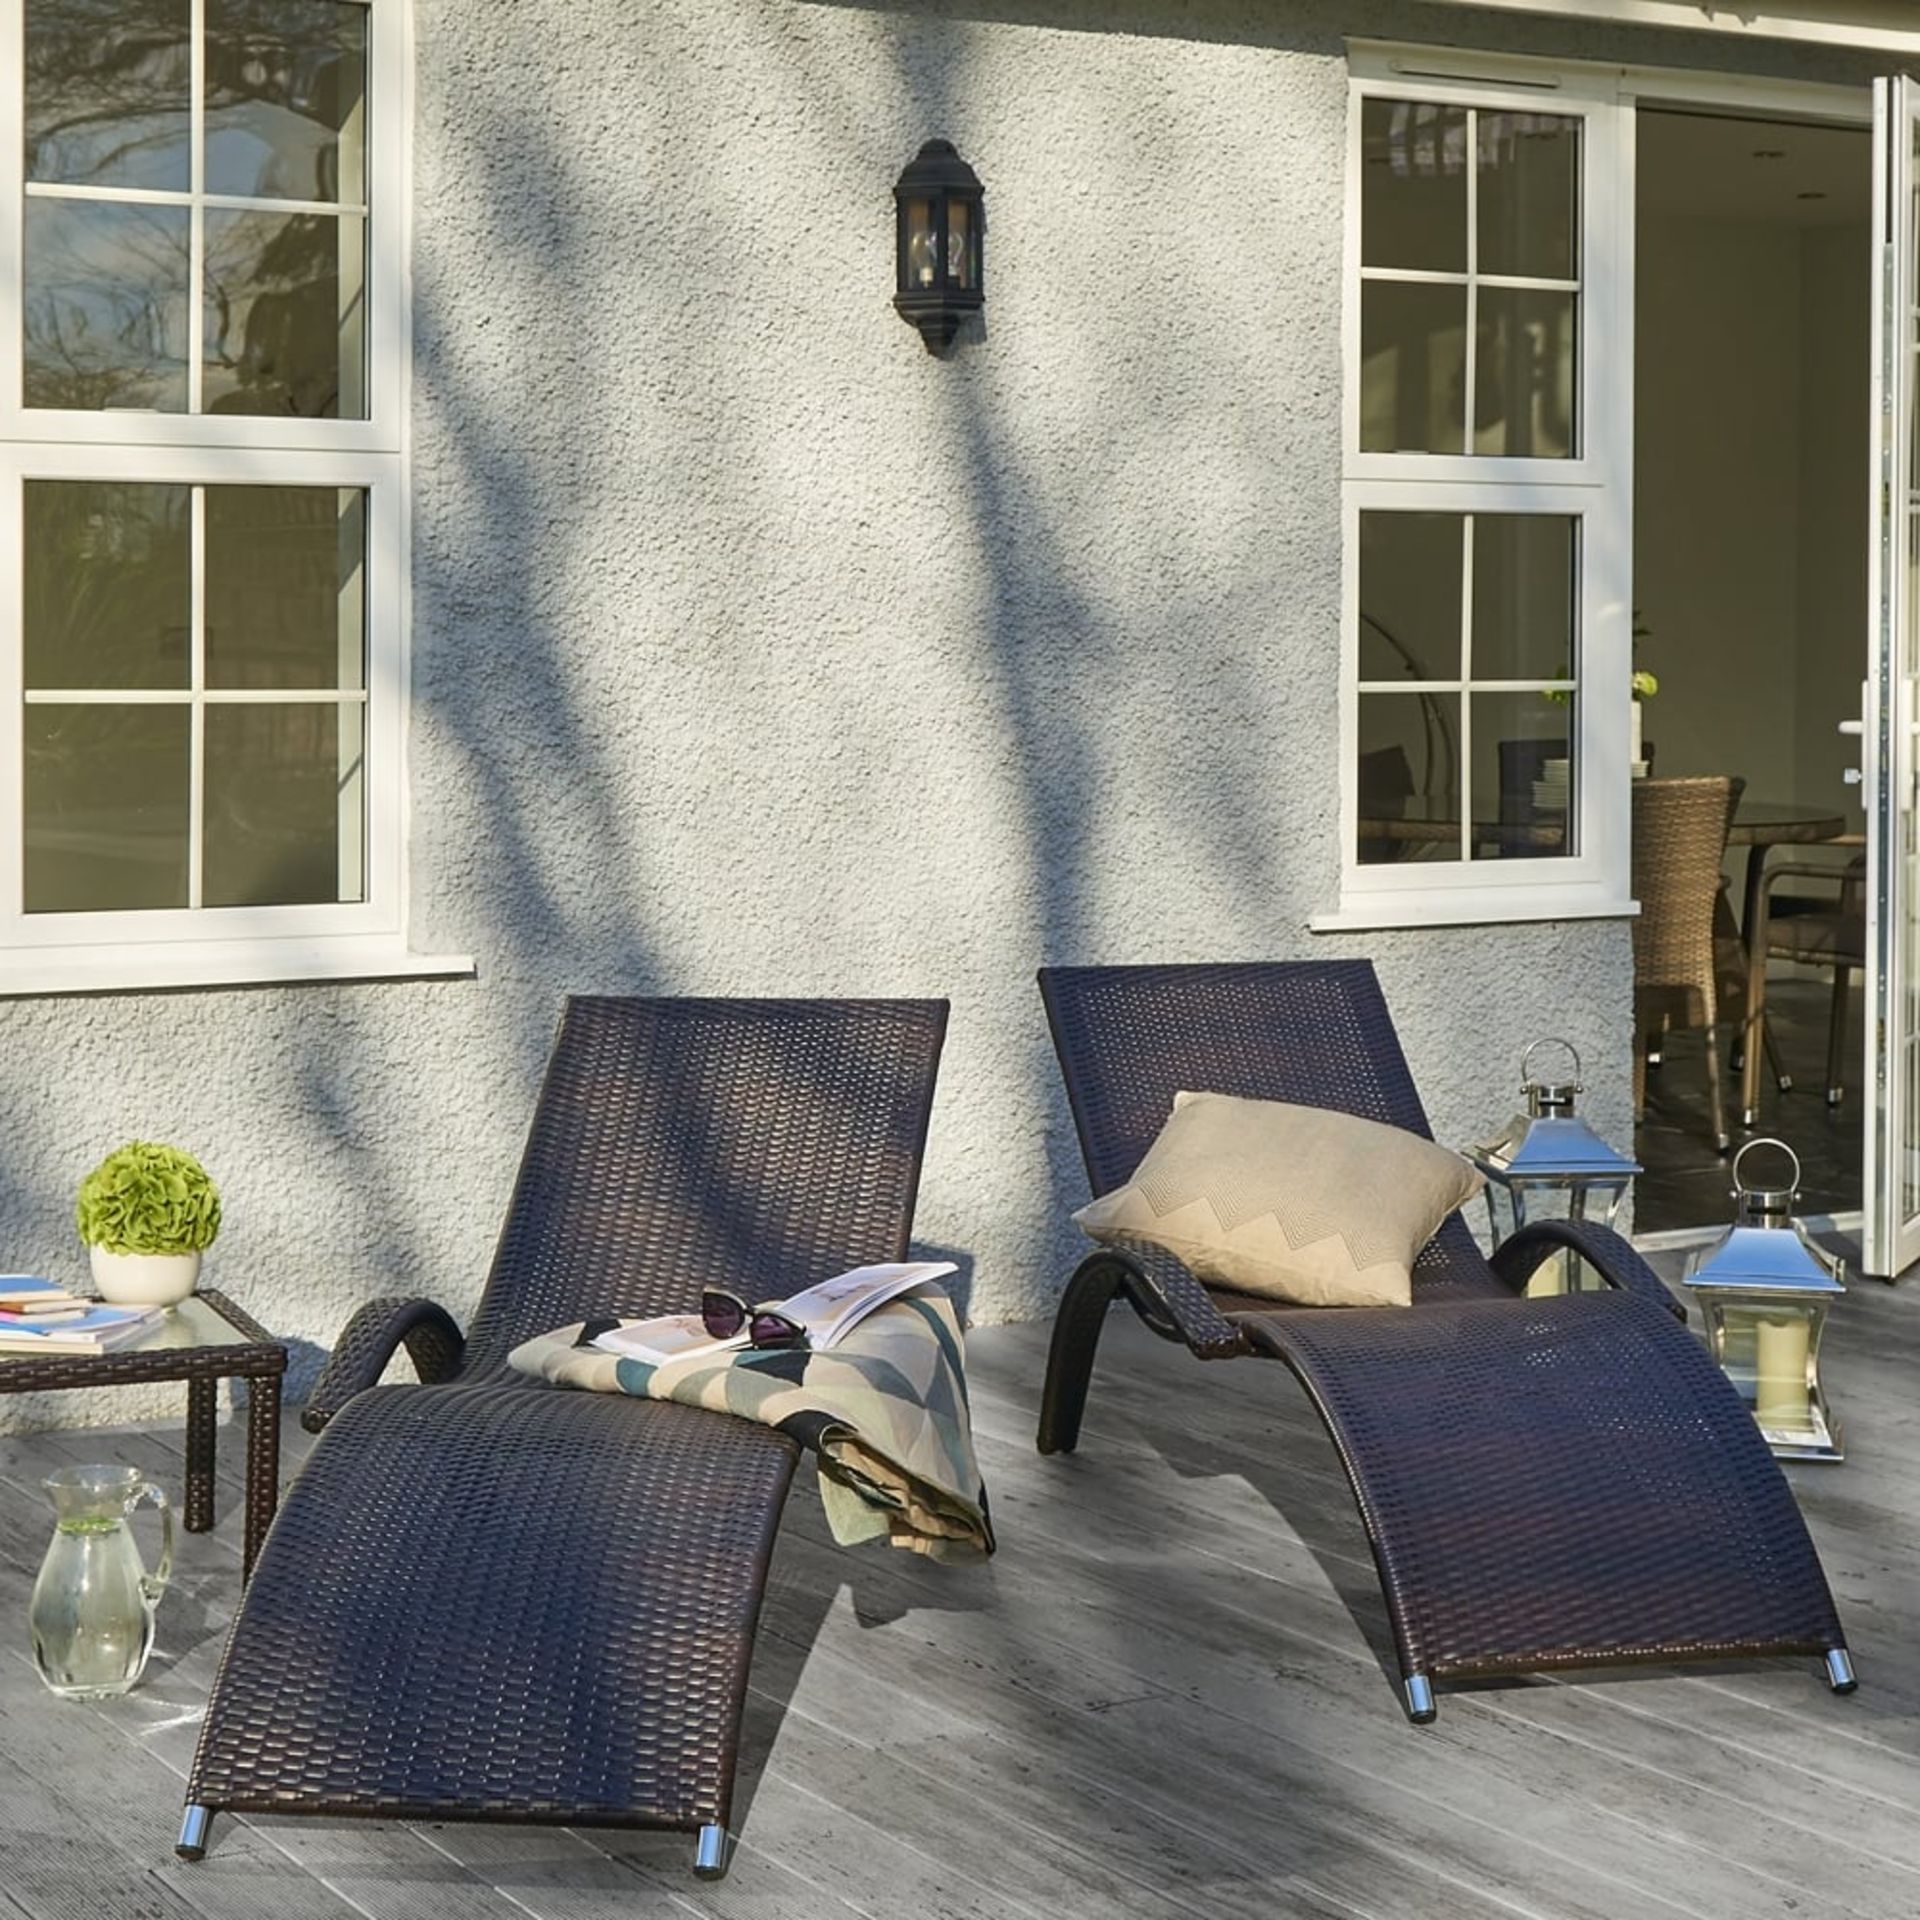 A Pair of Poole Sun loungers and Side Table.